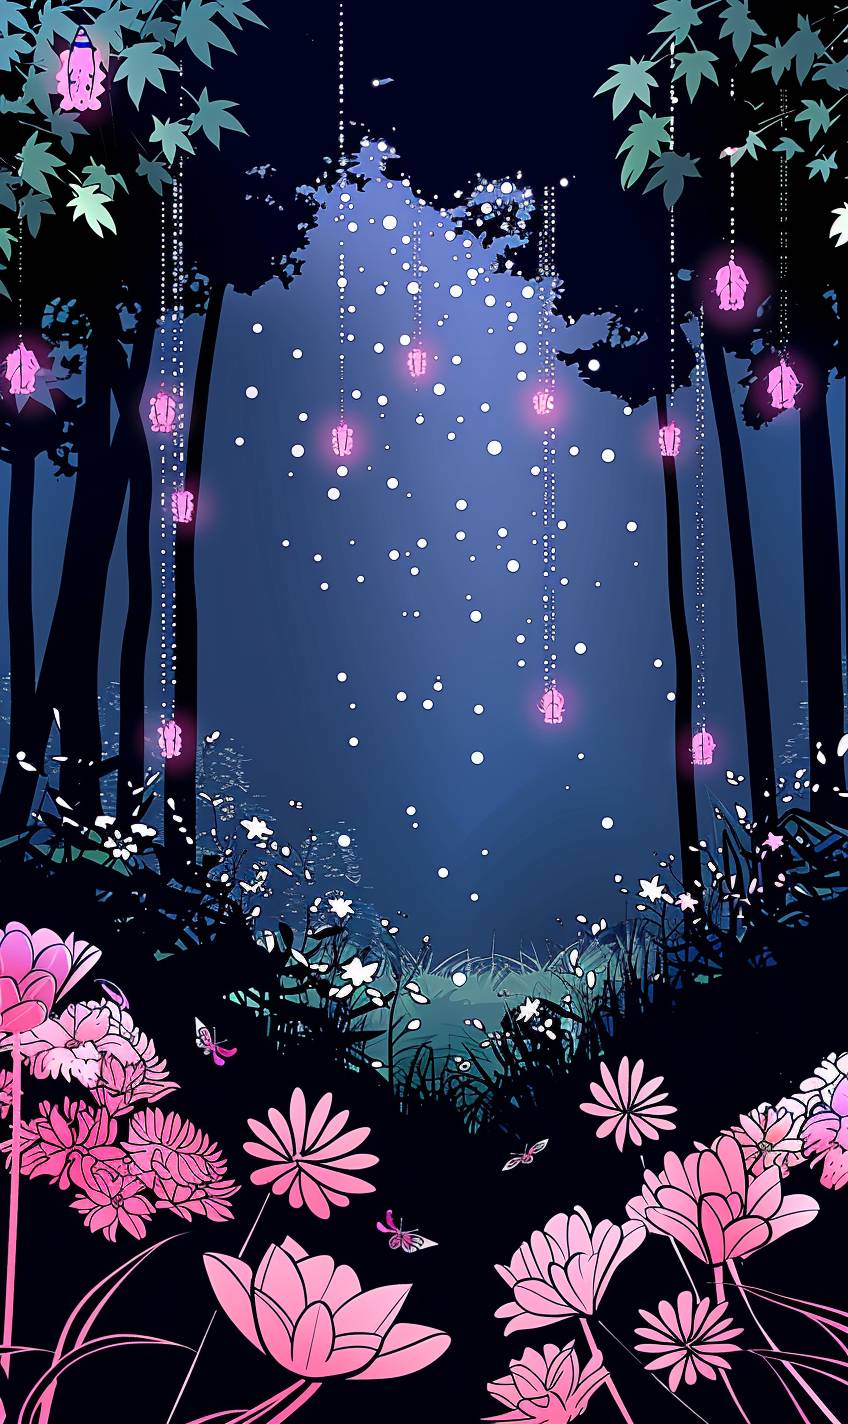 A mysterious enchanted forest with glowing plants, mythical creatures, and a gentle mist, soft moonlight creating an ethereal atmosphere